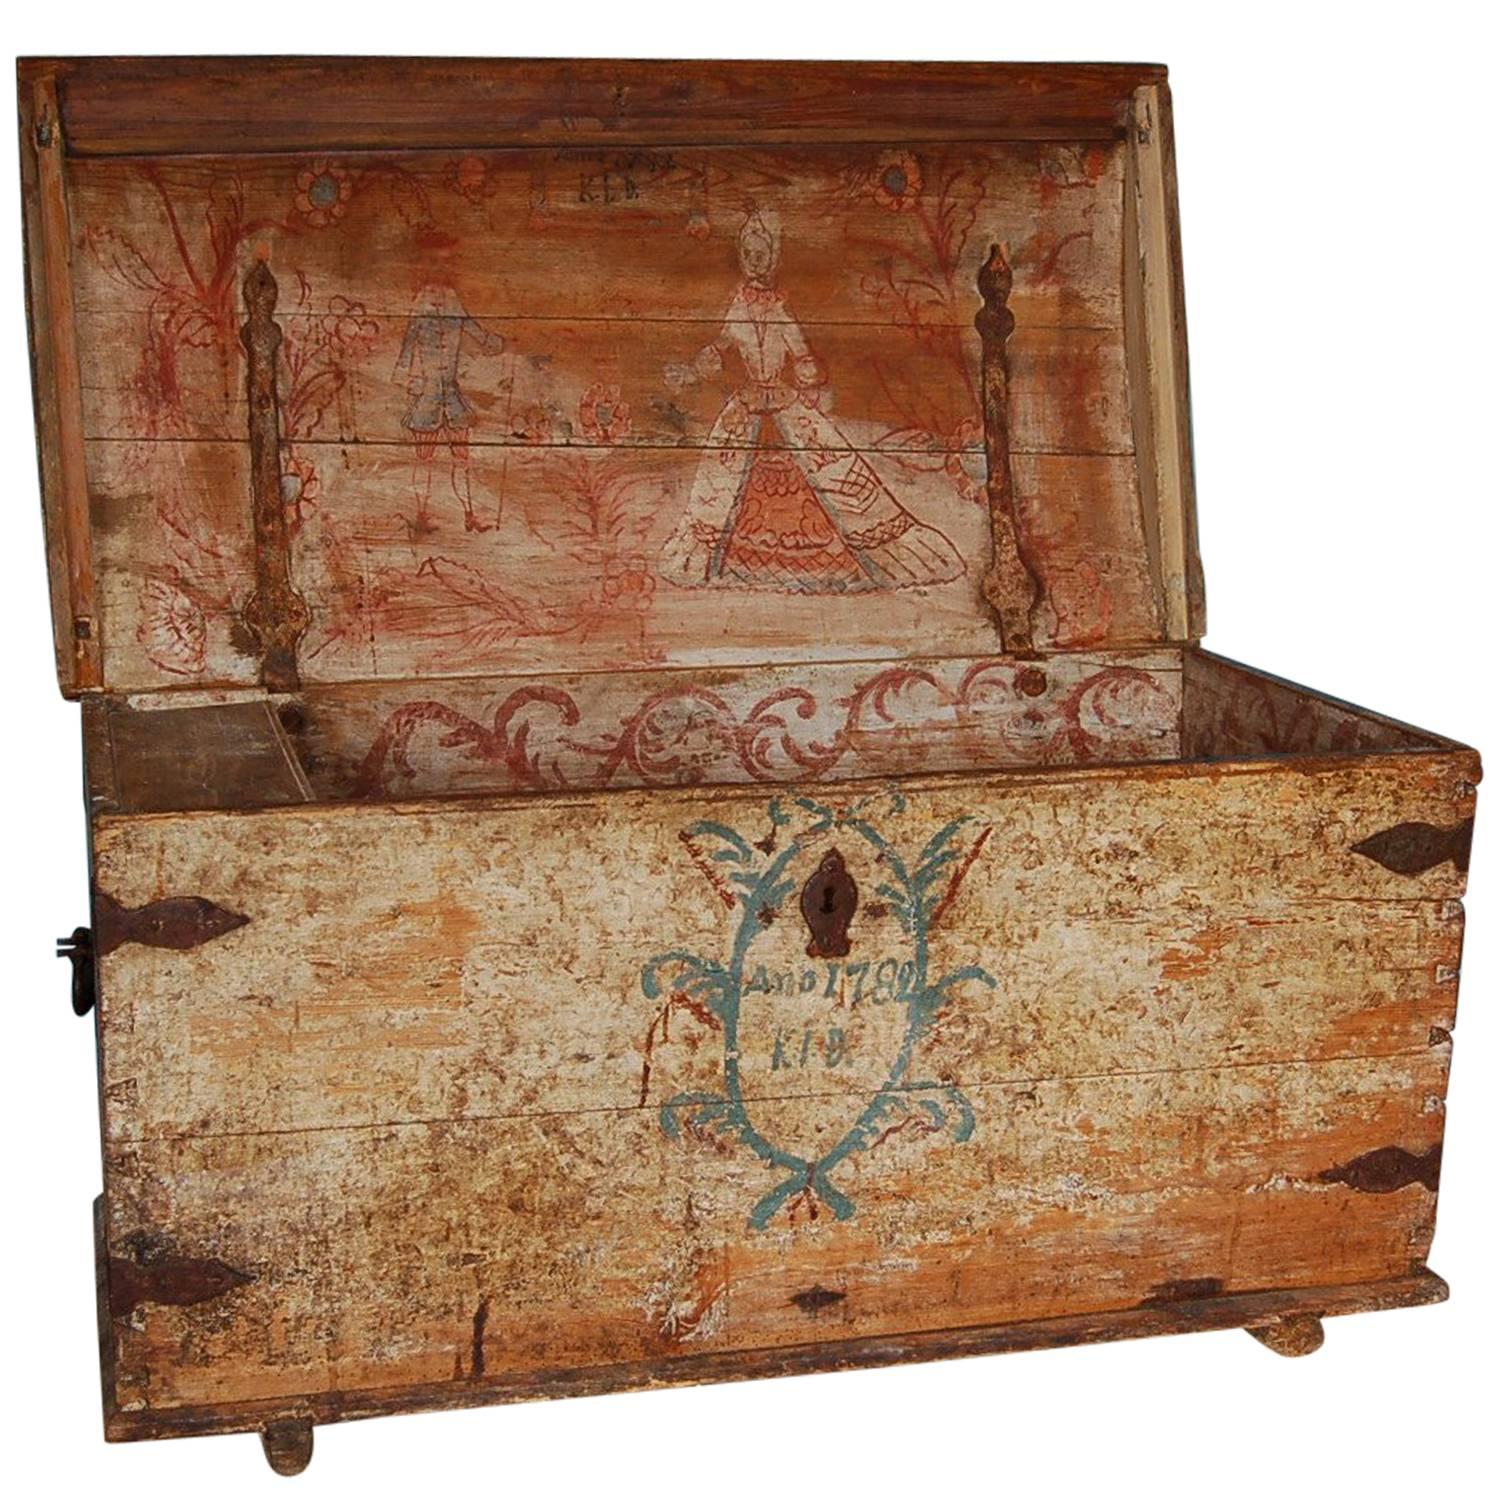 An exceptional Swedish Gustavian dowry chest with original paint on the interior and exterior. The interior painting depicts a marriage scene and the exterior is inscribed and dated Ano 1782 / KLD, origin: Sweden, dated 1782

All original paint and